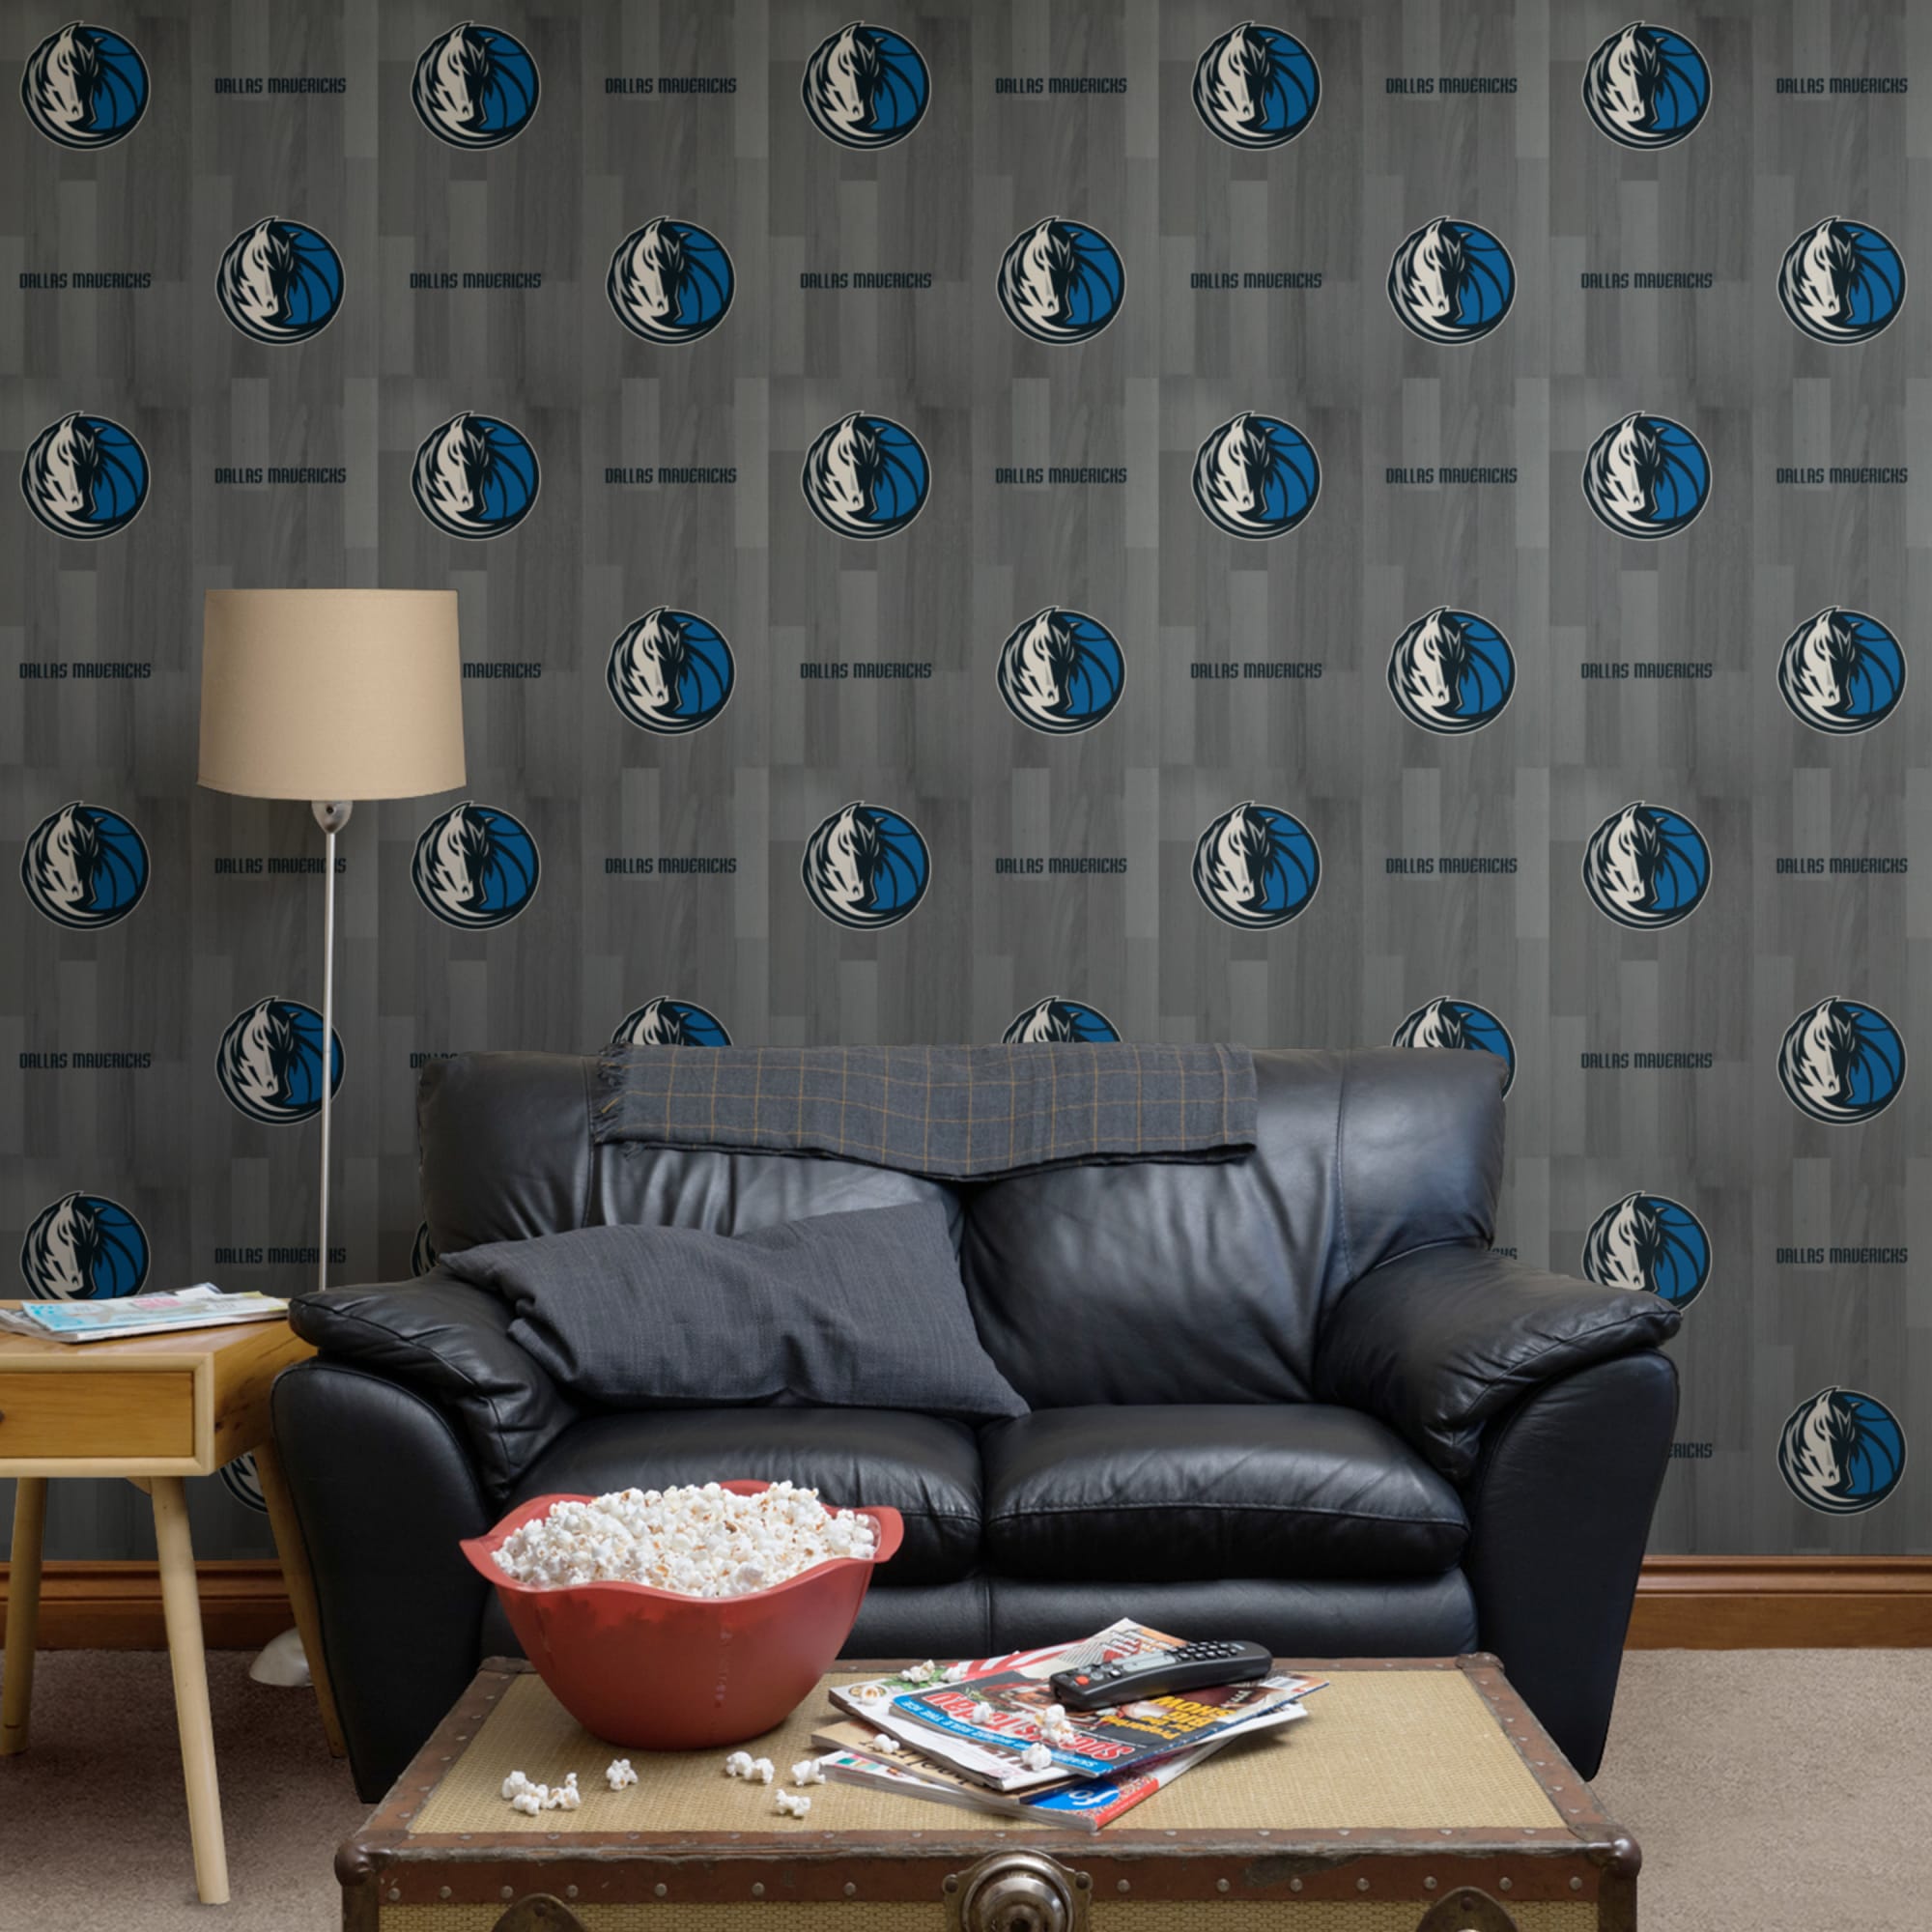 Dallas Mavericks: Hardwood Pattern - Officially Licensed Removable Wallpaper 12" x 12" Sample by Fathead